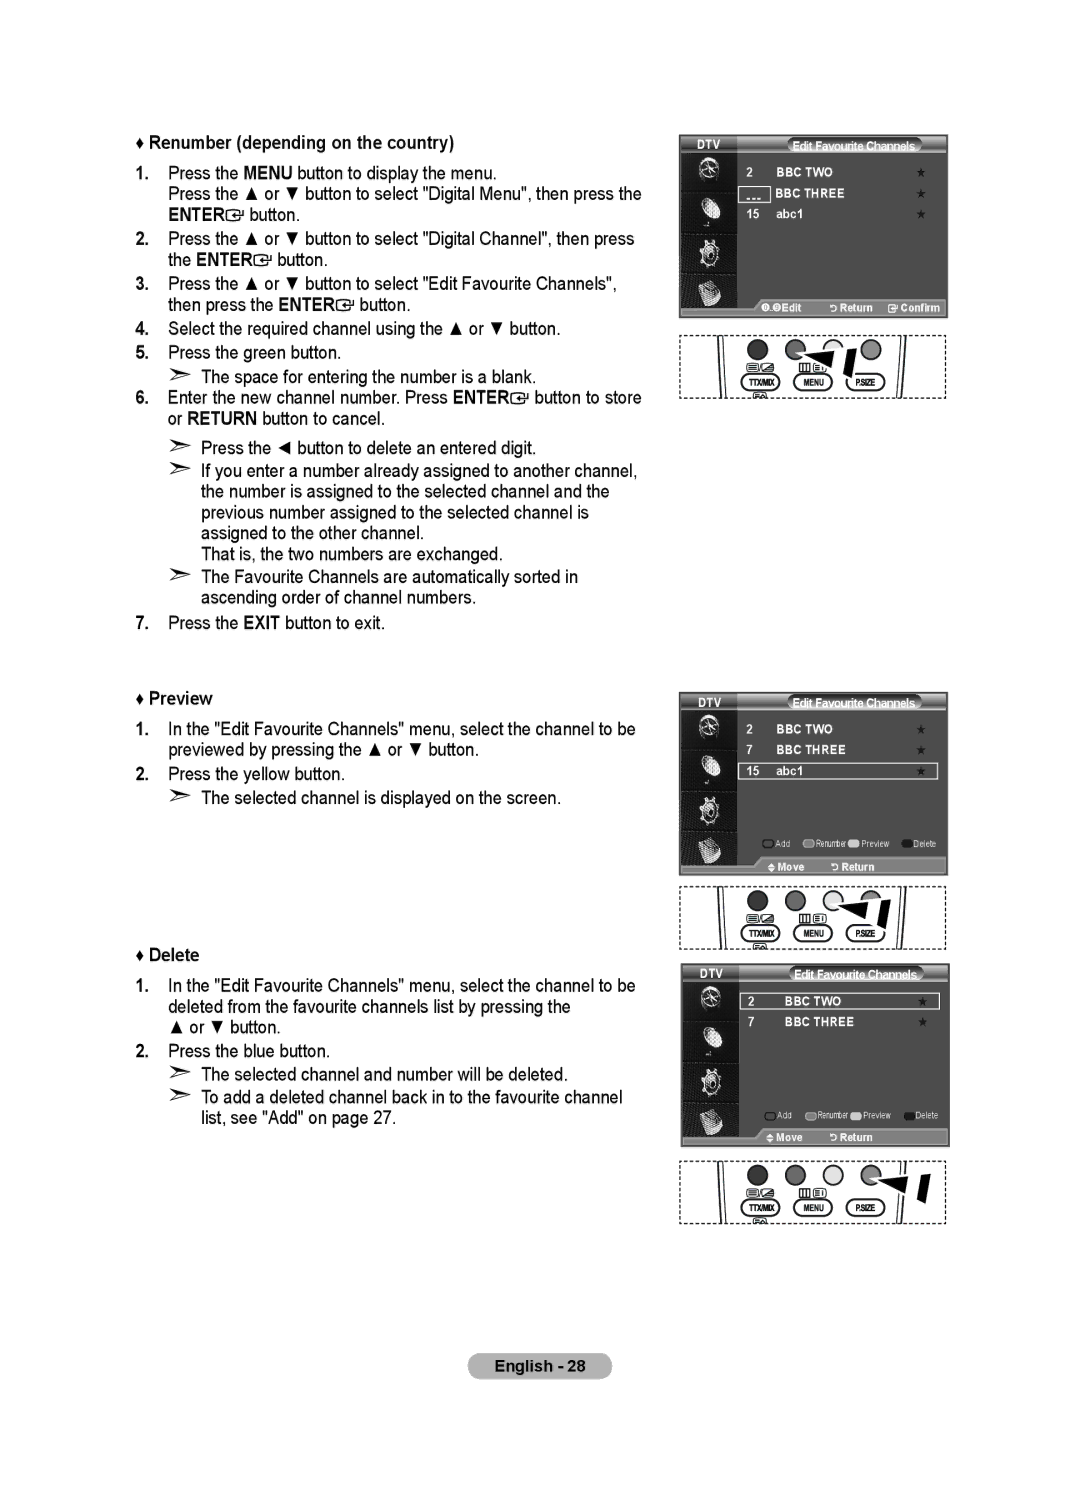 Samsung LE22A455C1D user manual Renumber depending on the country, Preview, Delete 